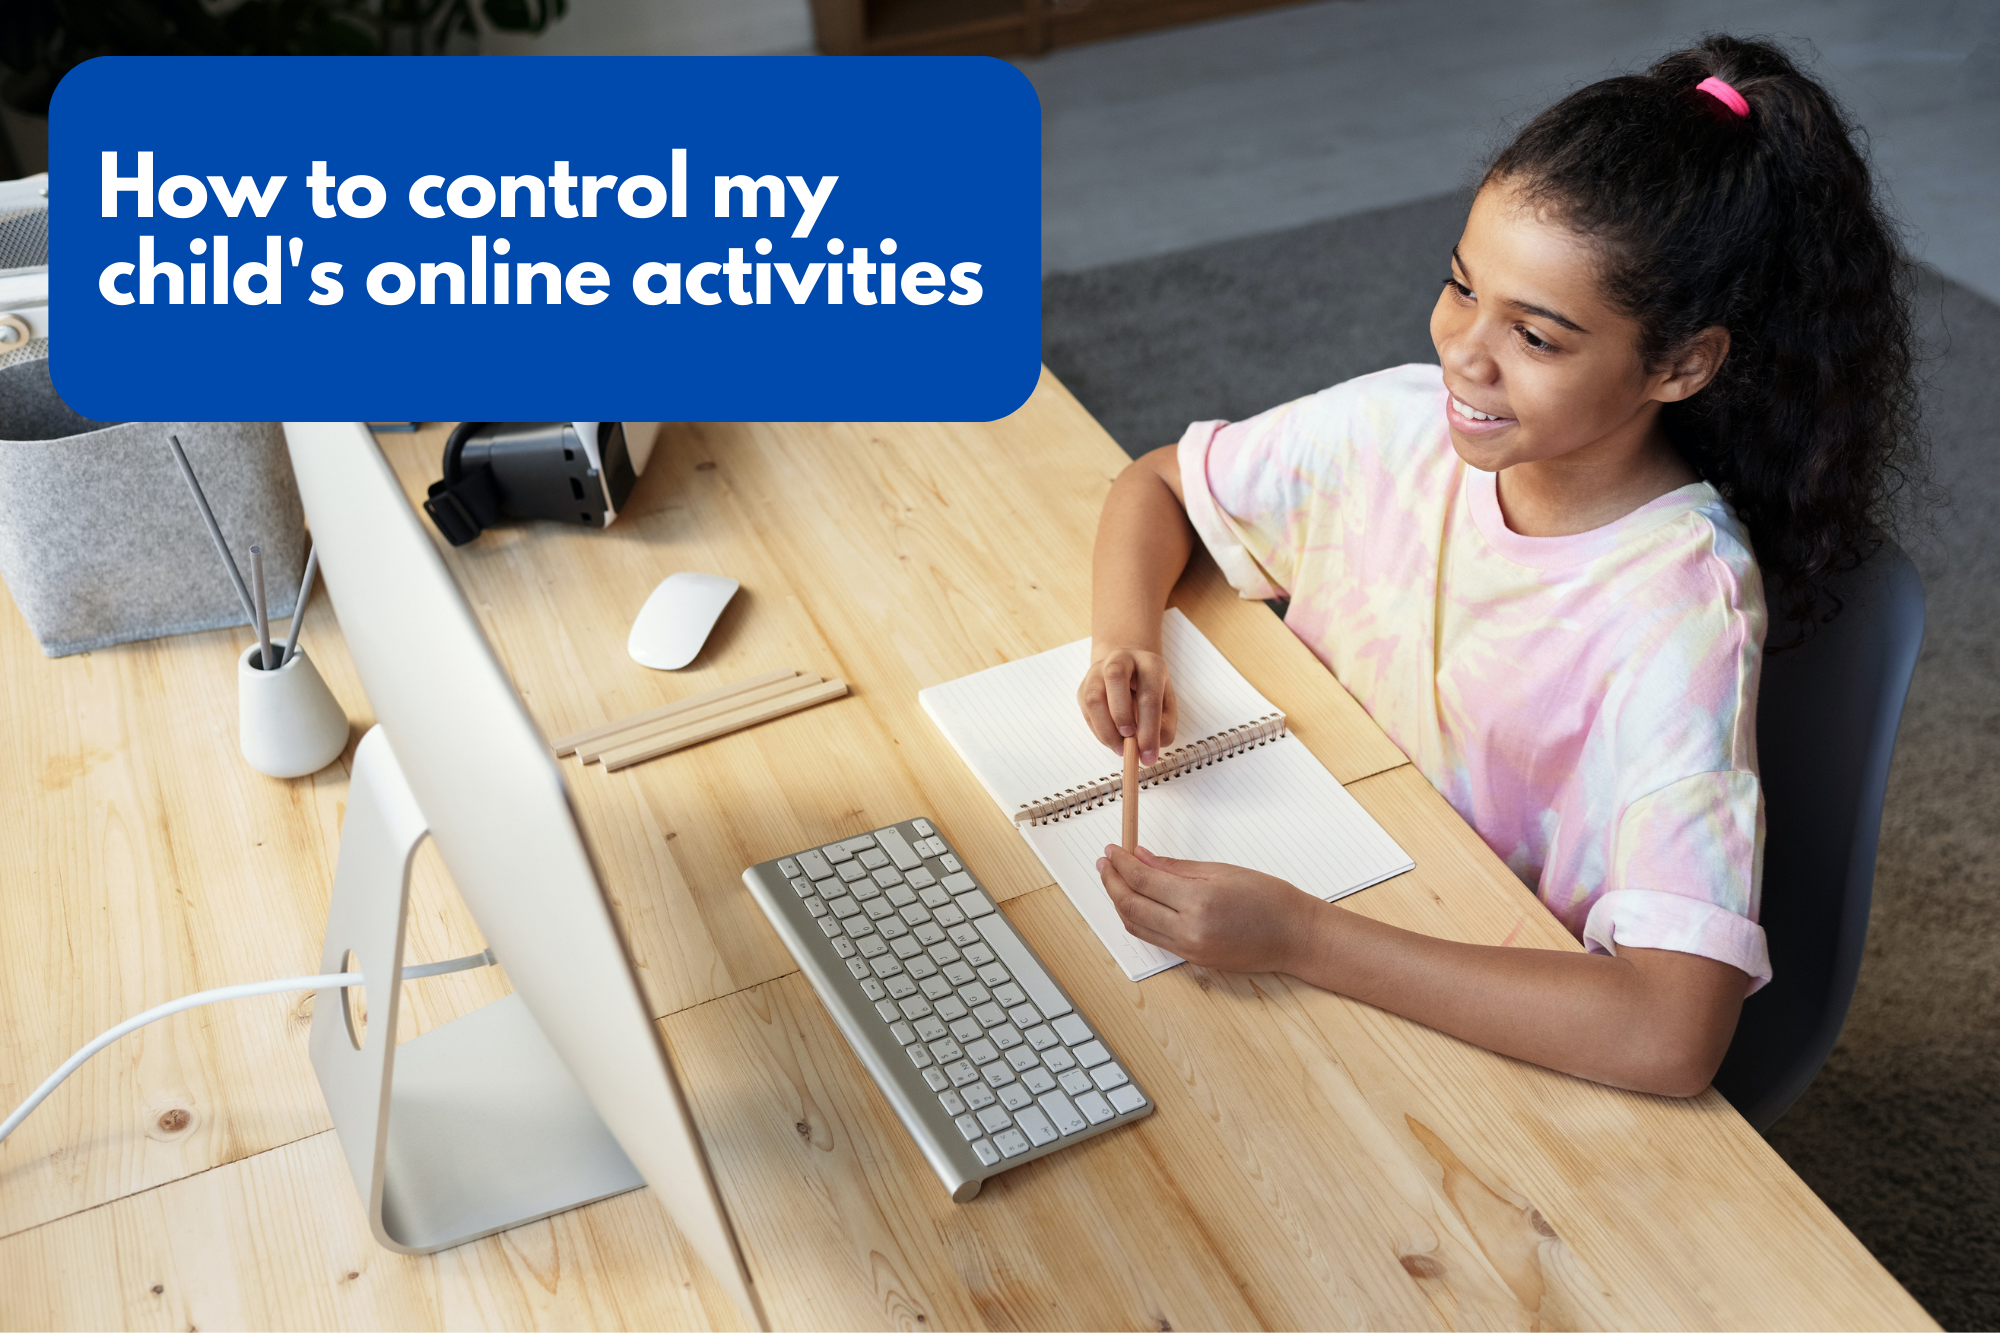 How to control what my child watches and does online